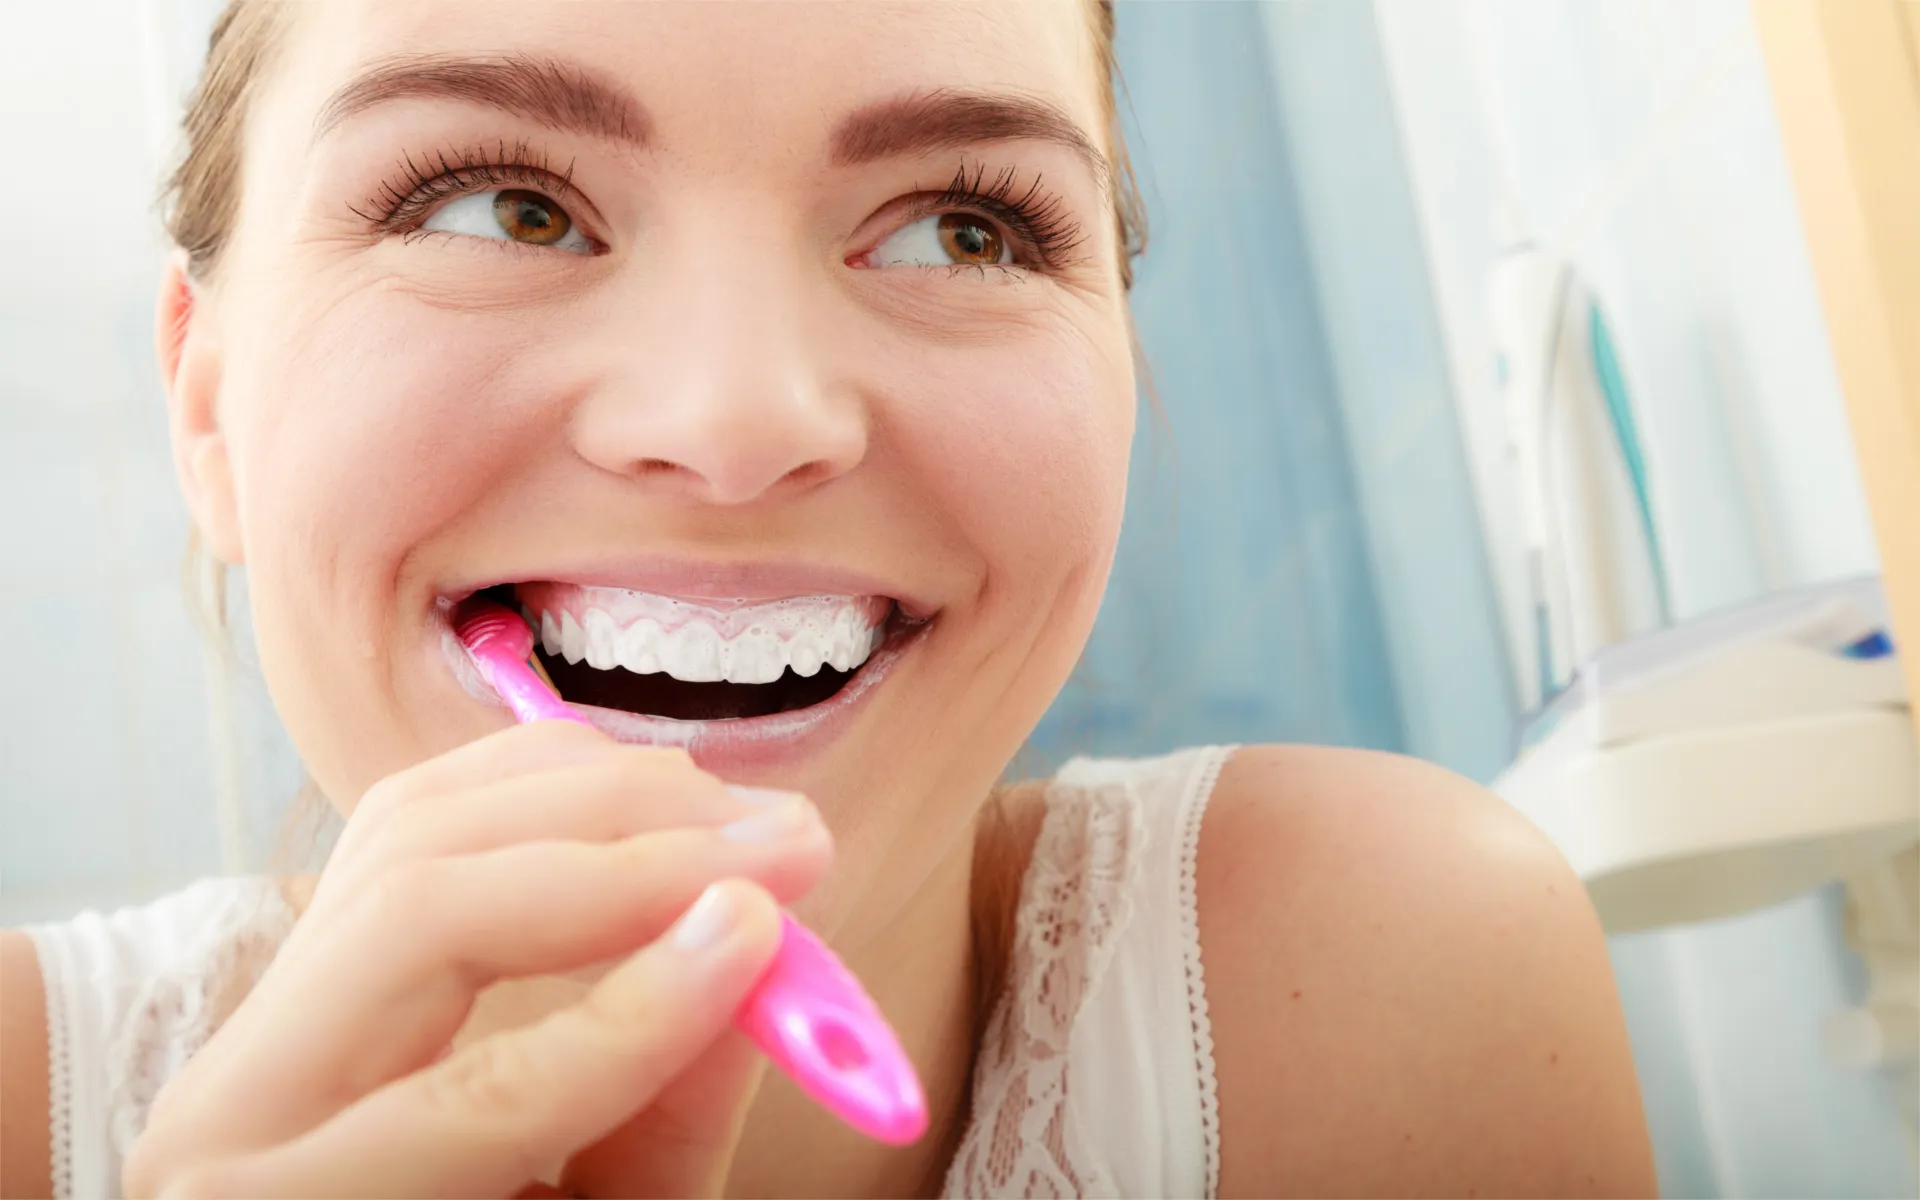 Oral Health and Its Connection to the Rest of Your Body